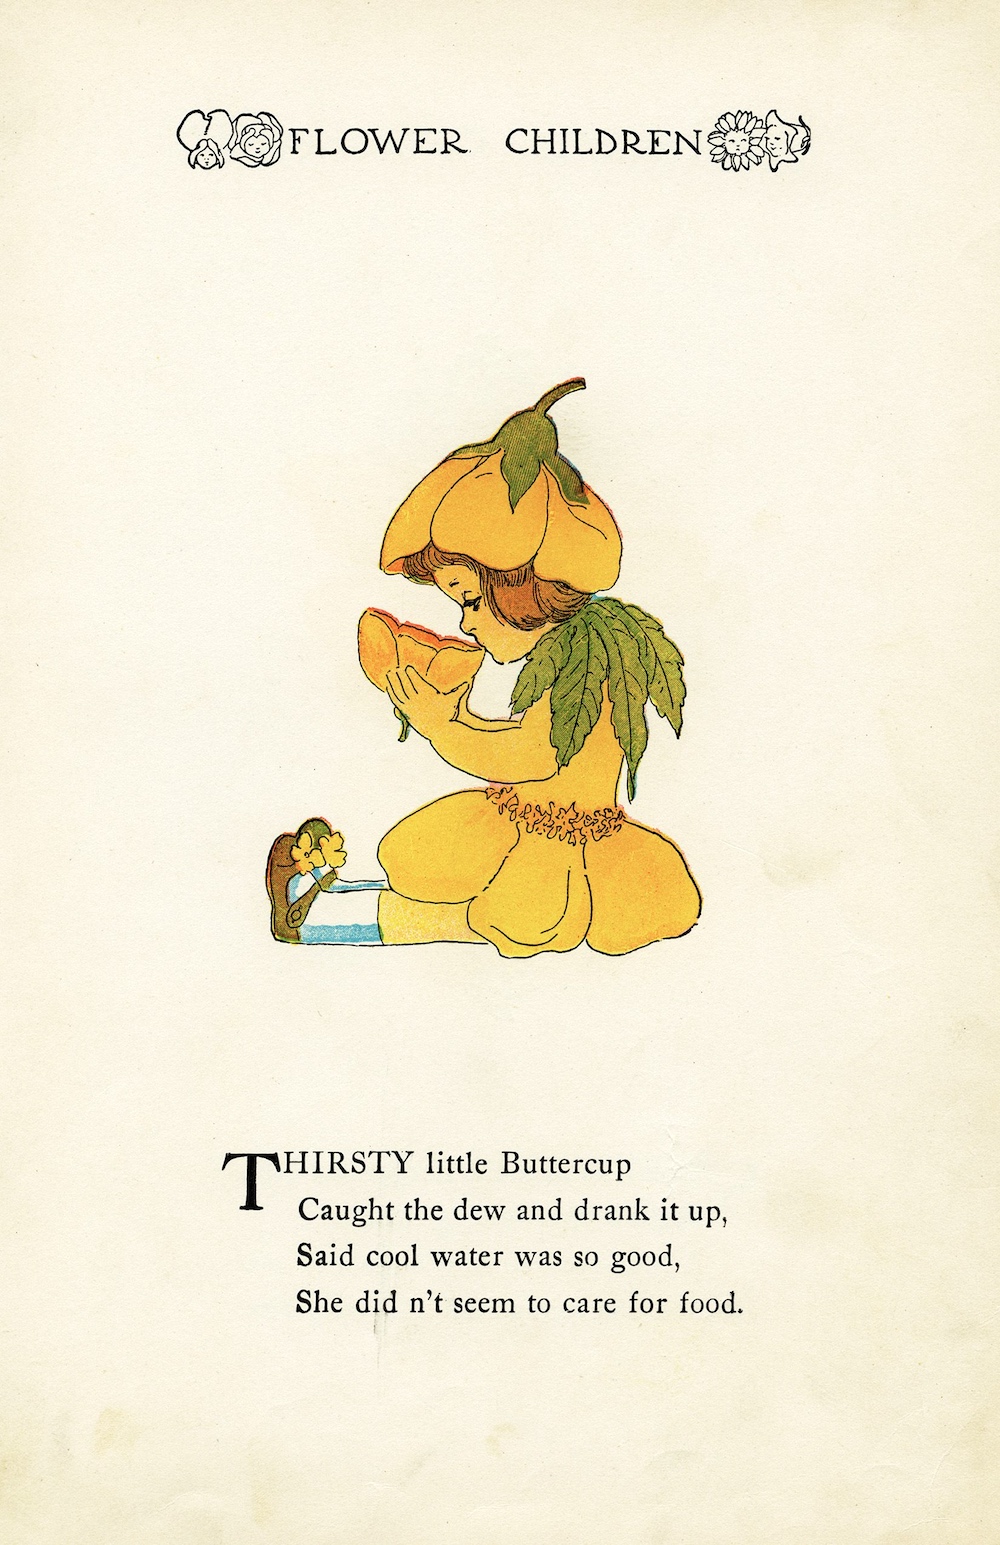 TButtercup by Elizabeth Gordon with illustration by  M. T. (Penny) Ross.